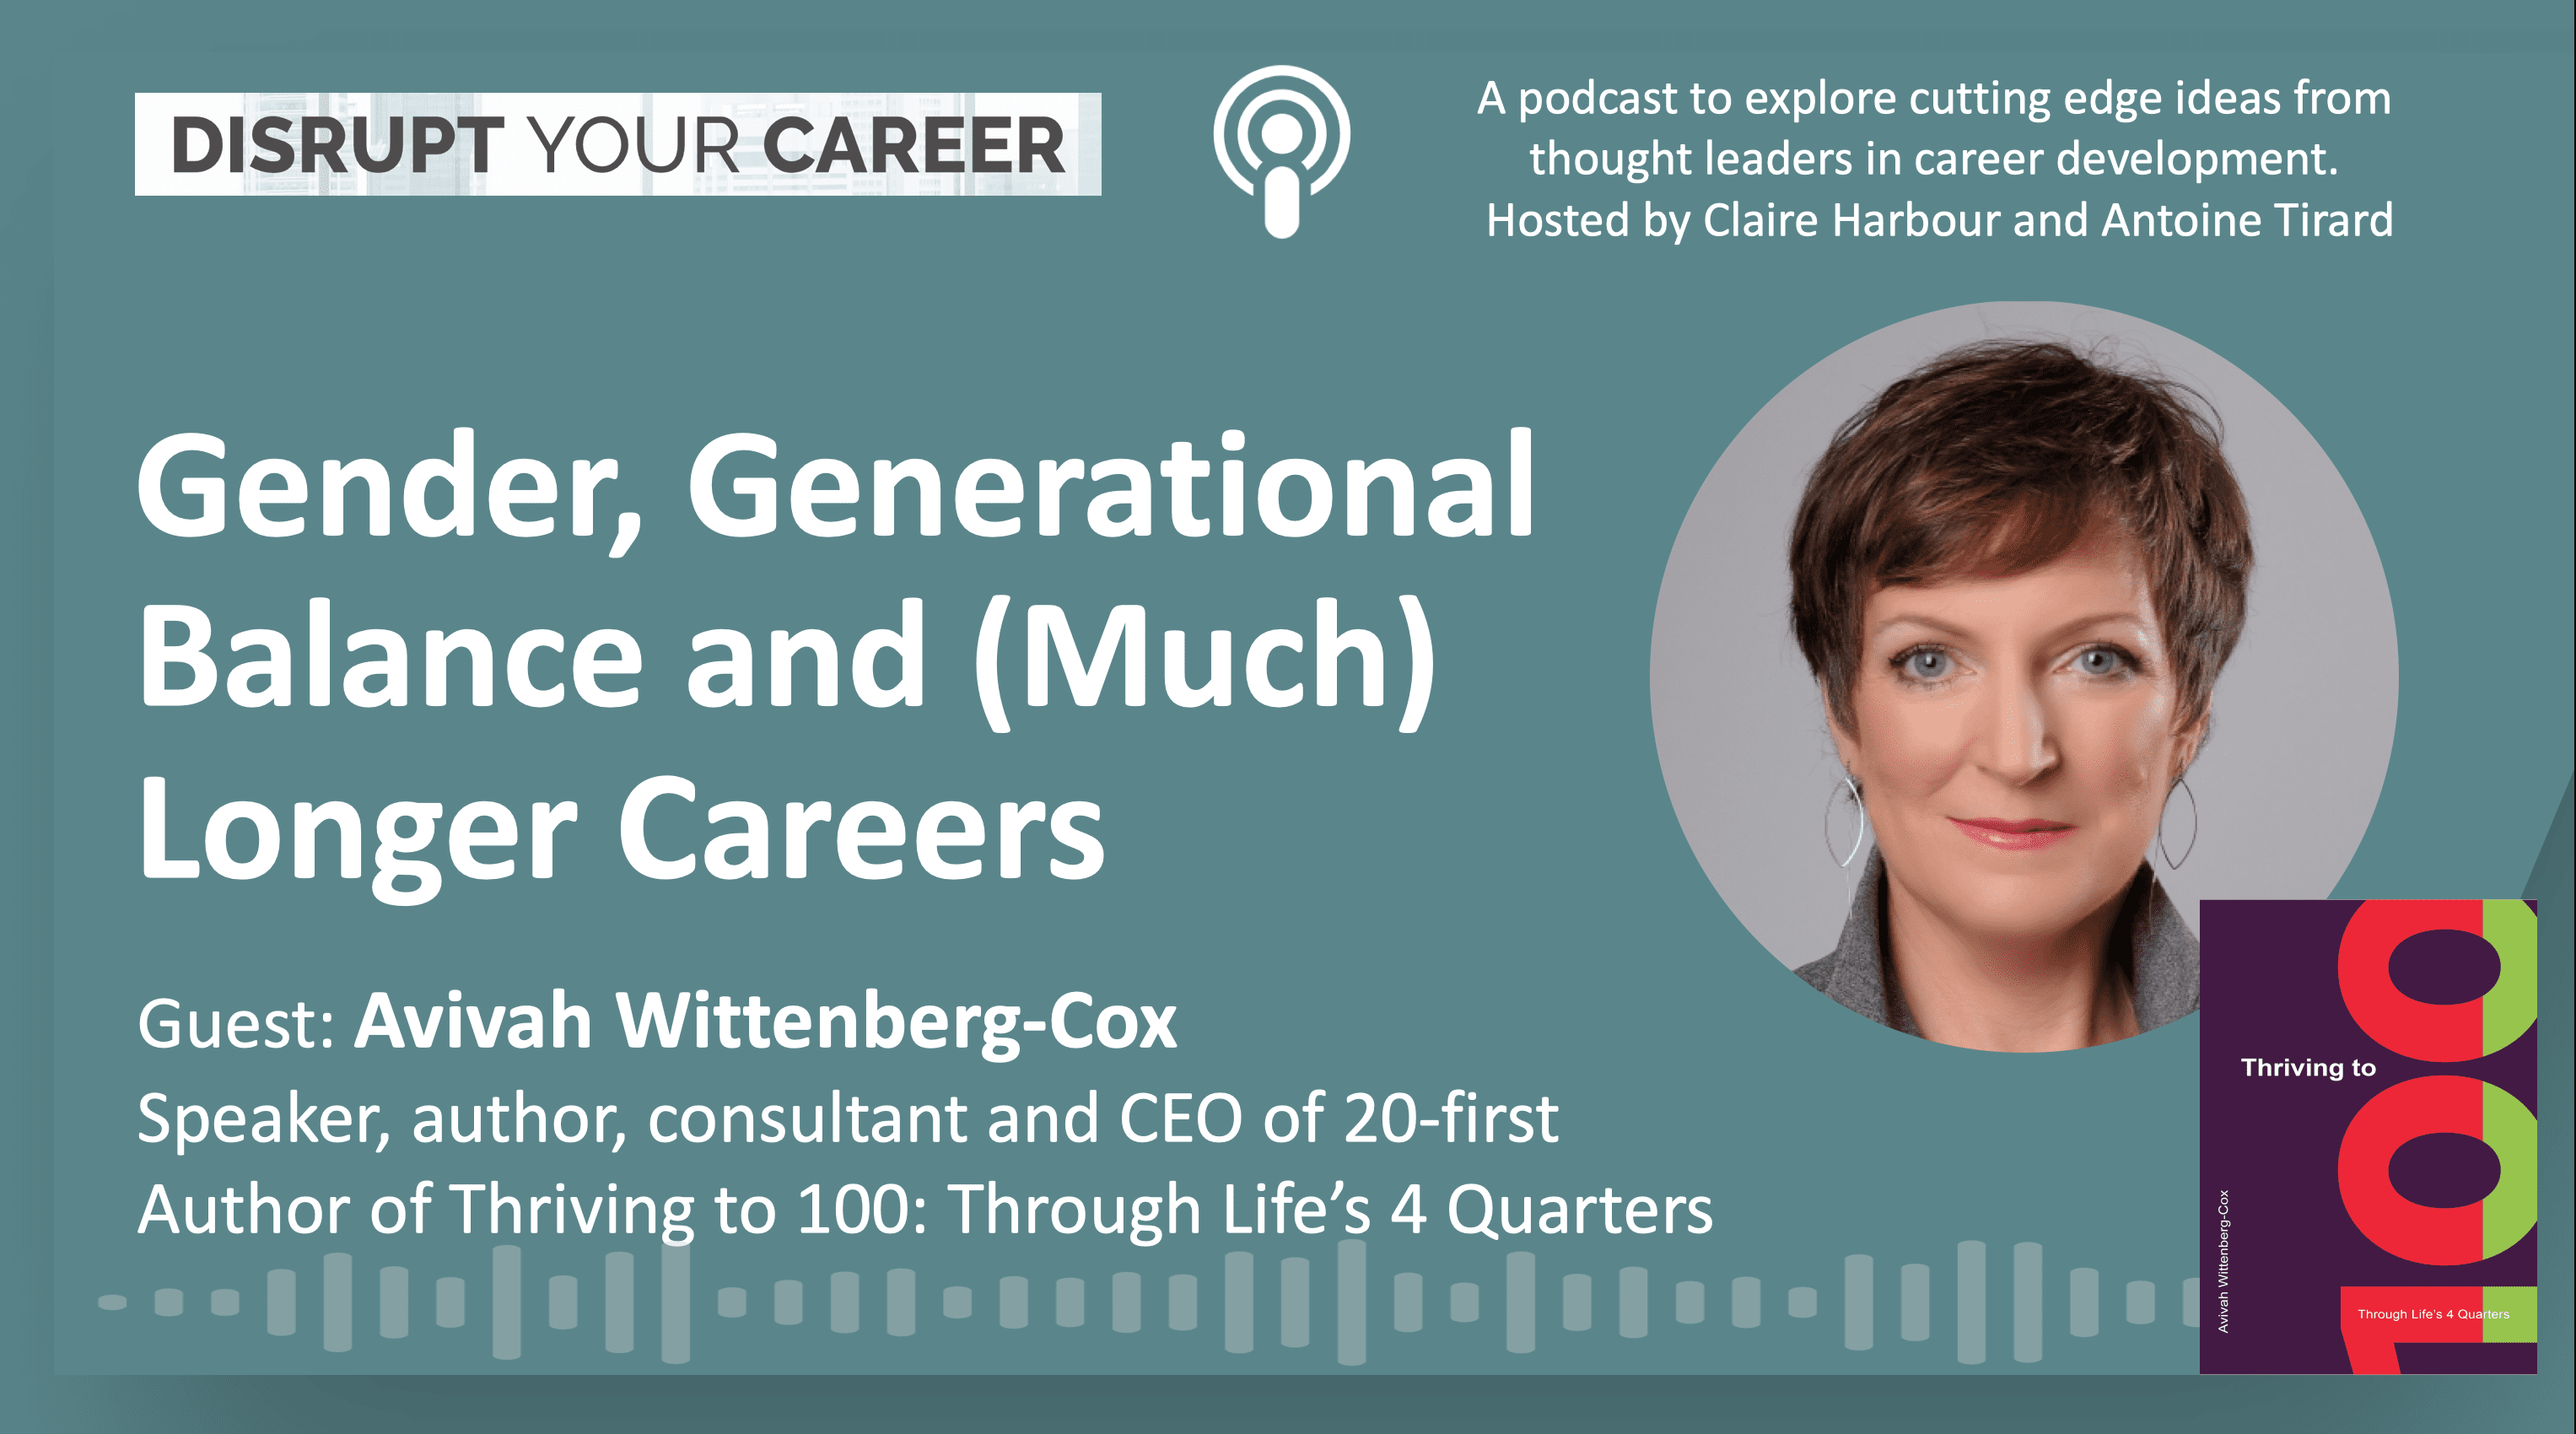 Gender, Generational Balance and (Much) Longer Careers